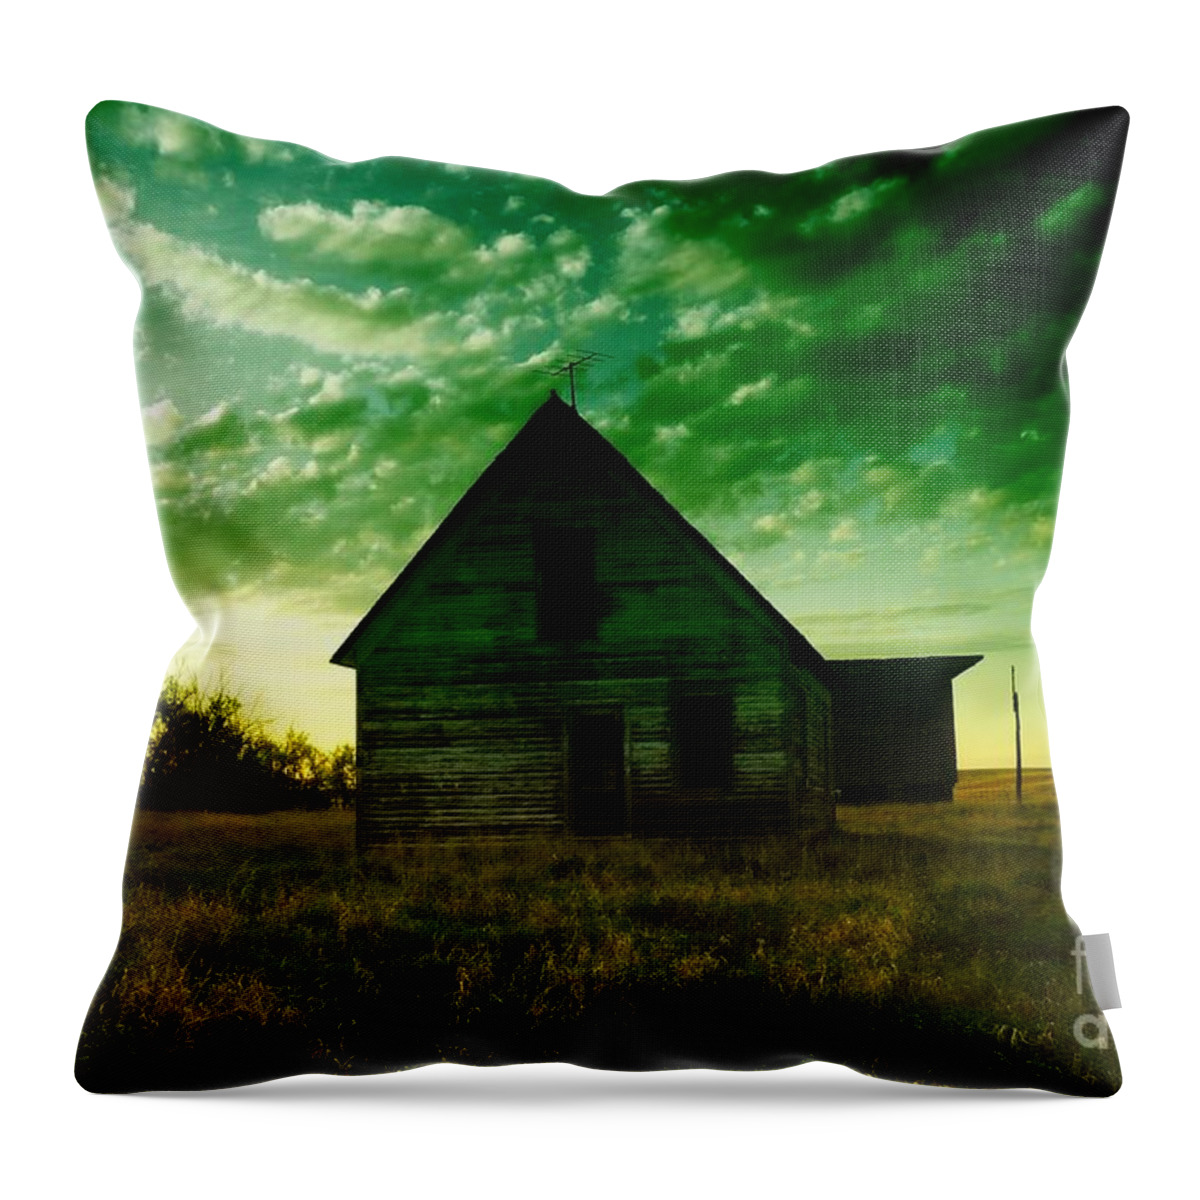 Houses Throw Pillow featuring the photograph An Old North Dakota Farm House by Jeff Swan